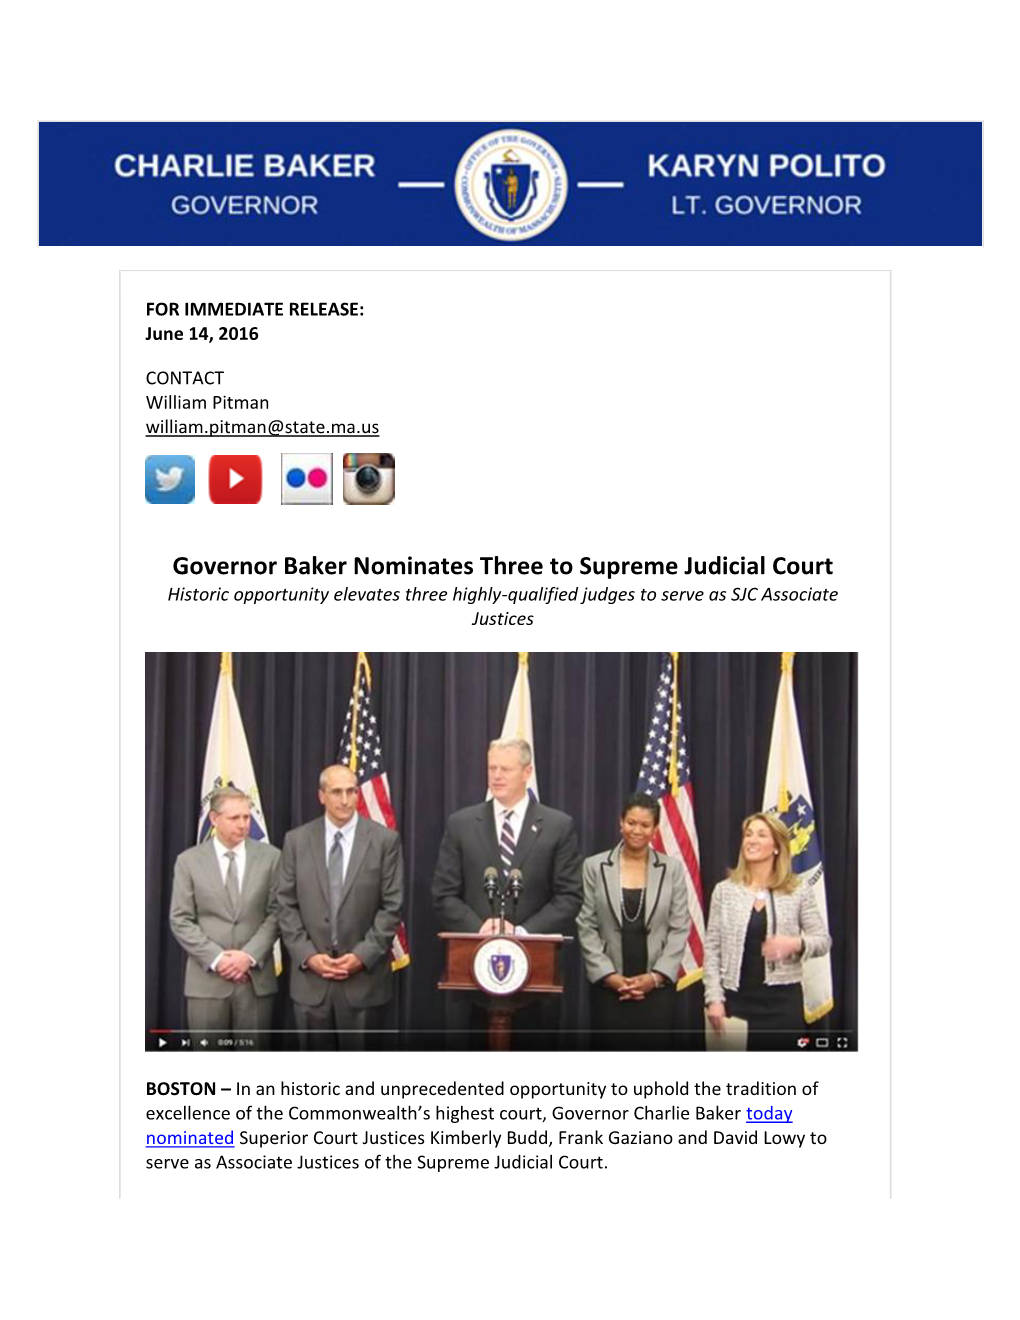 Governor Baker Nominates Three to Supreme Judicial Court Historic Opportunity Elevates Three Highly-Qualified Judges to Serve As SJC Associate Justices